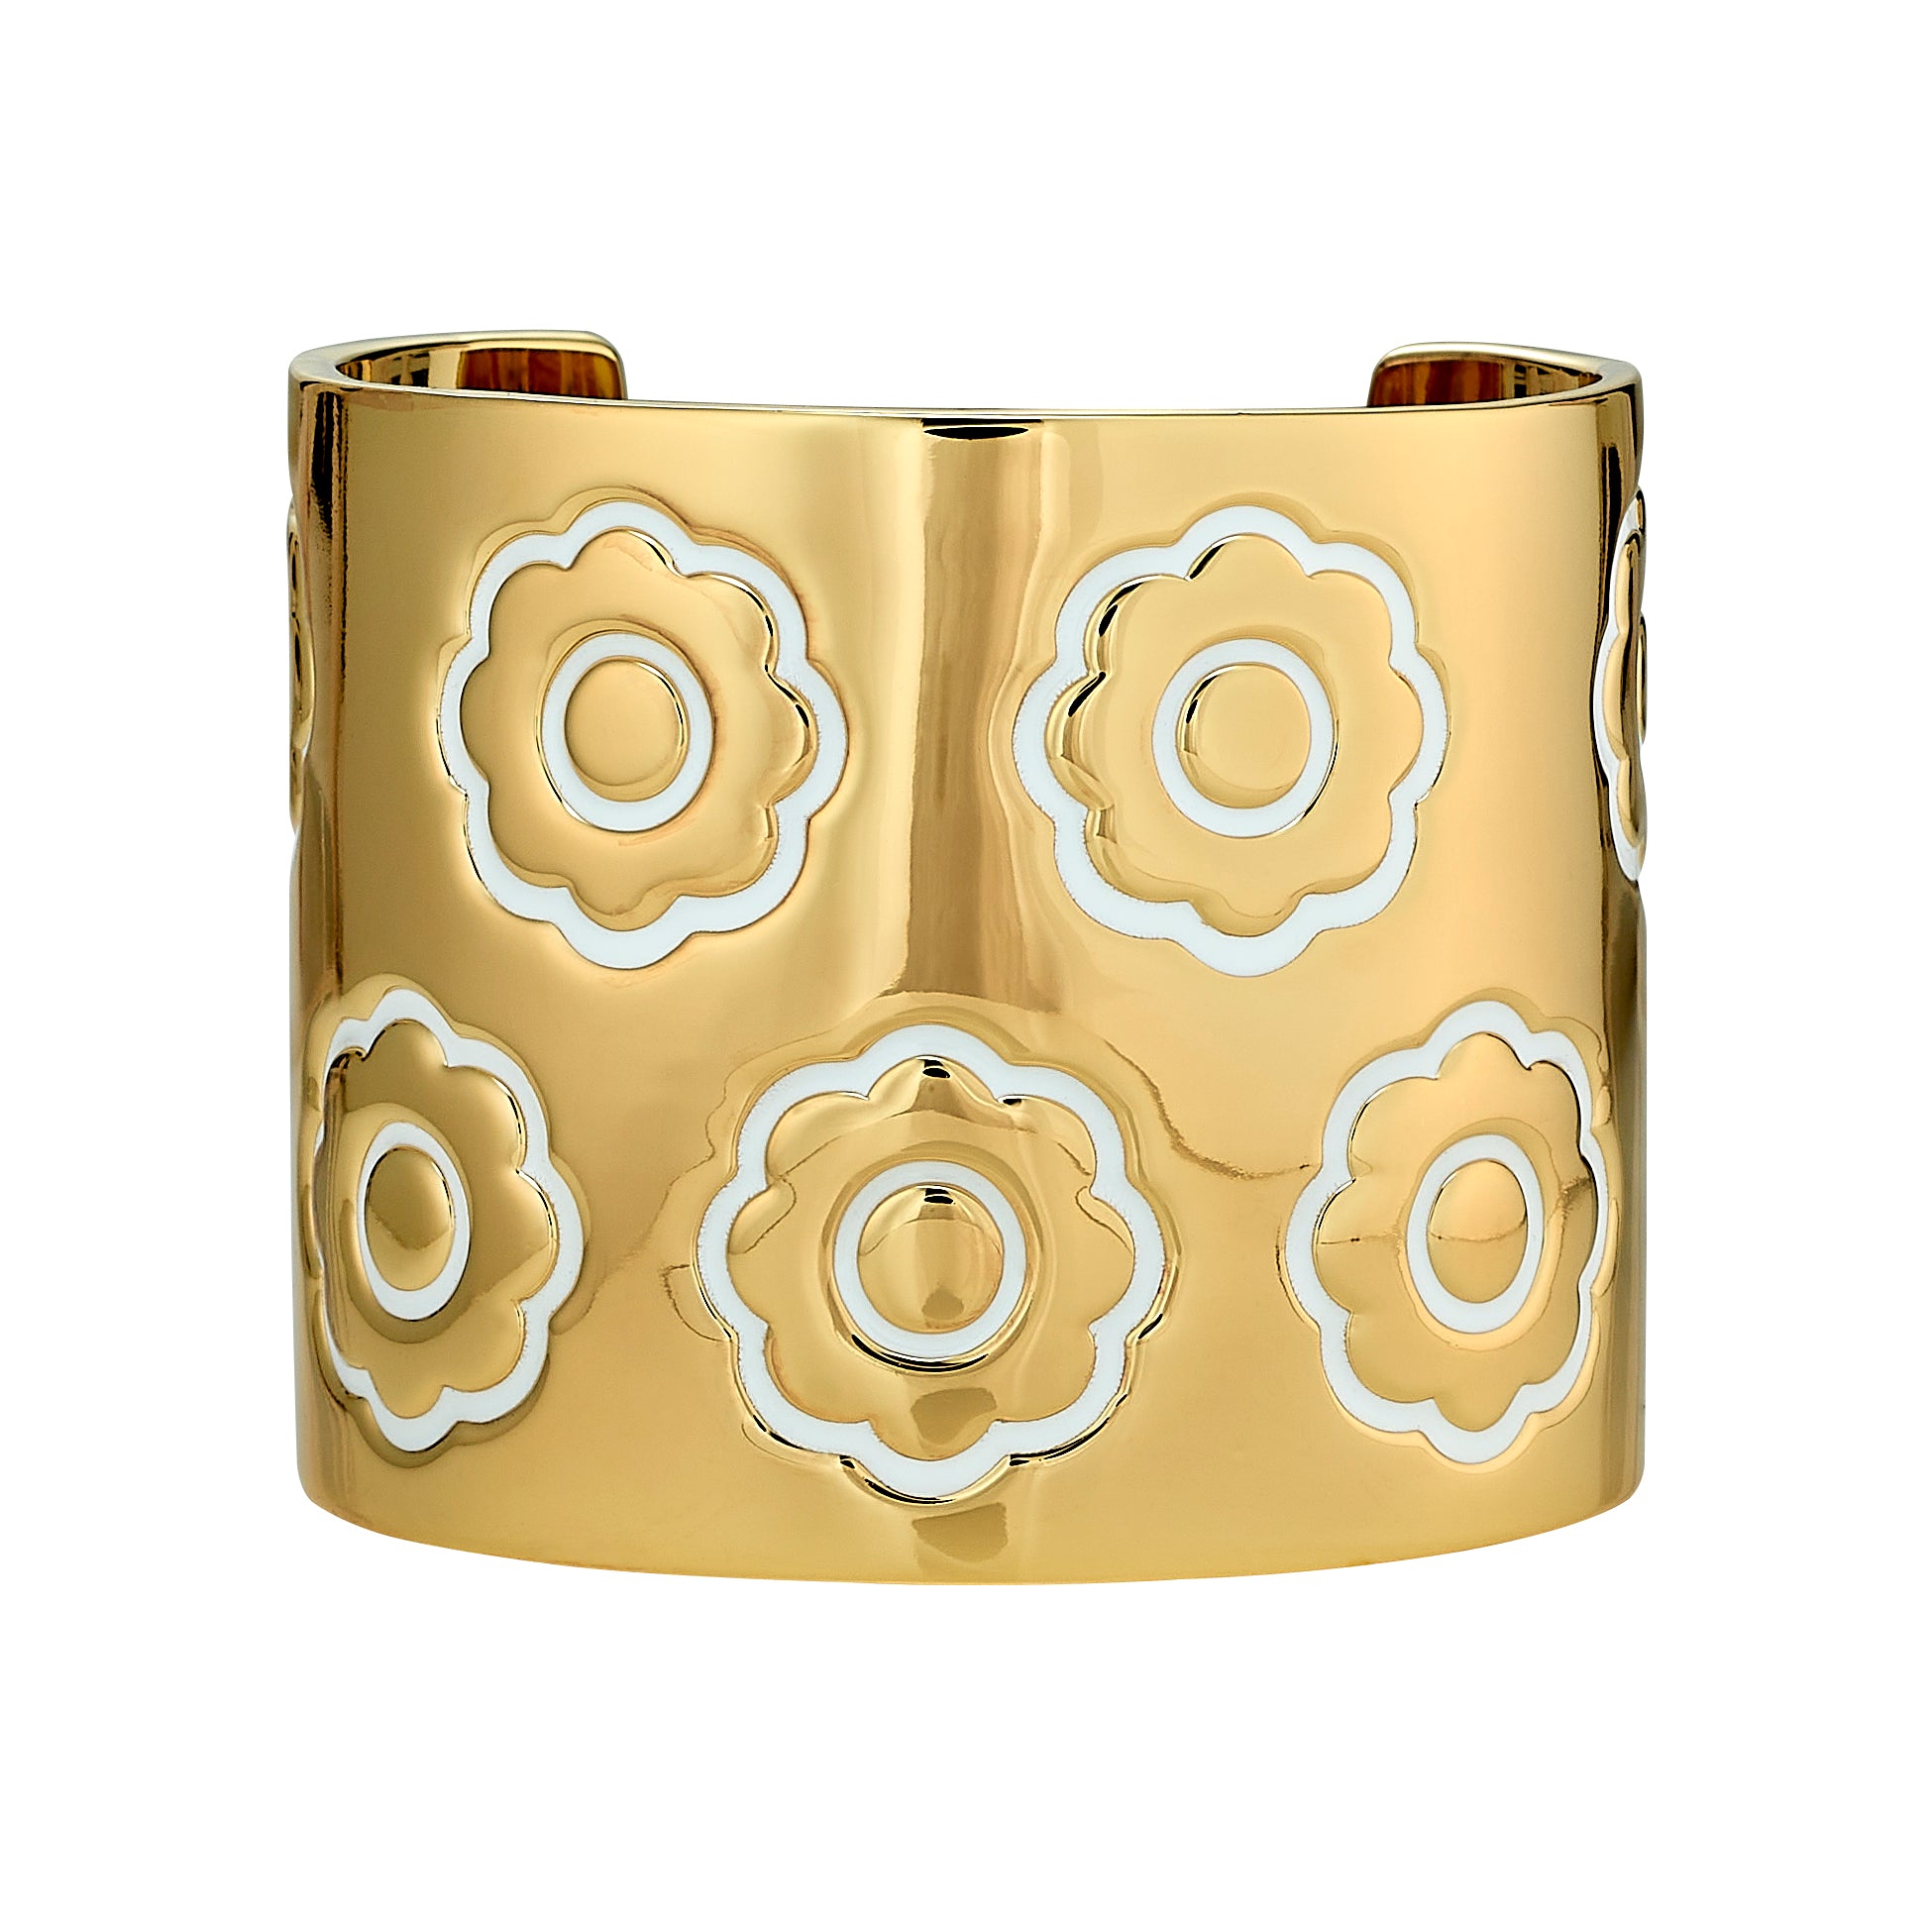 Engraved Flower Cuff - Ivory